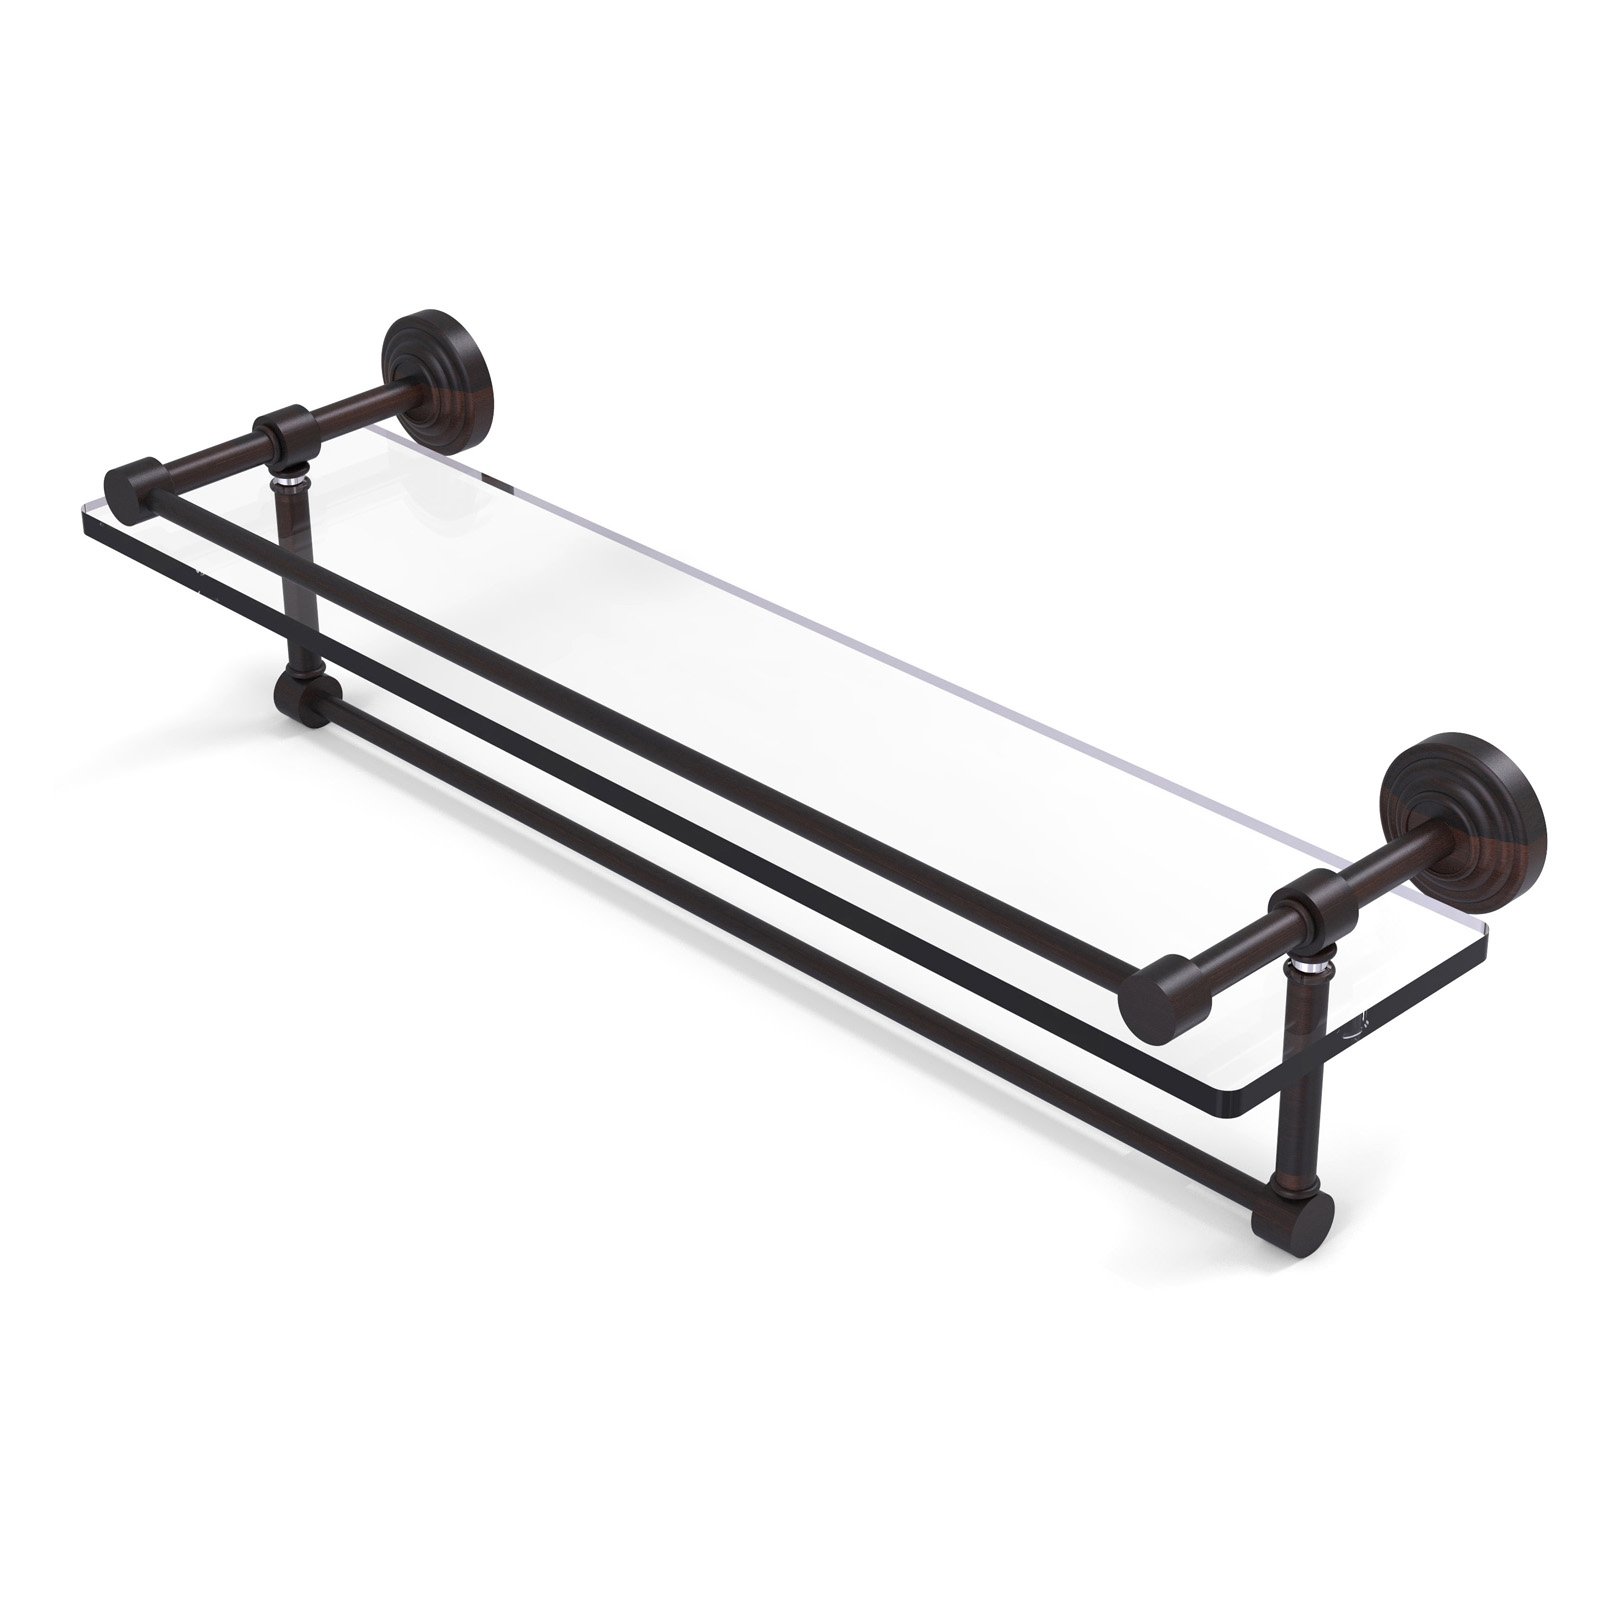 16-in Gallery Glass Shelf with Towel Bar in Matte Black - image 2 of 2